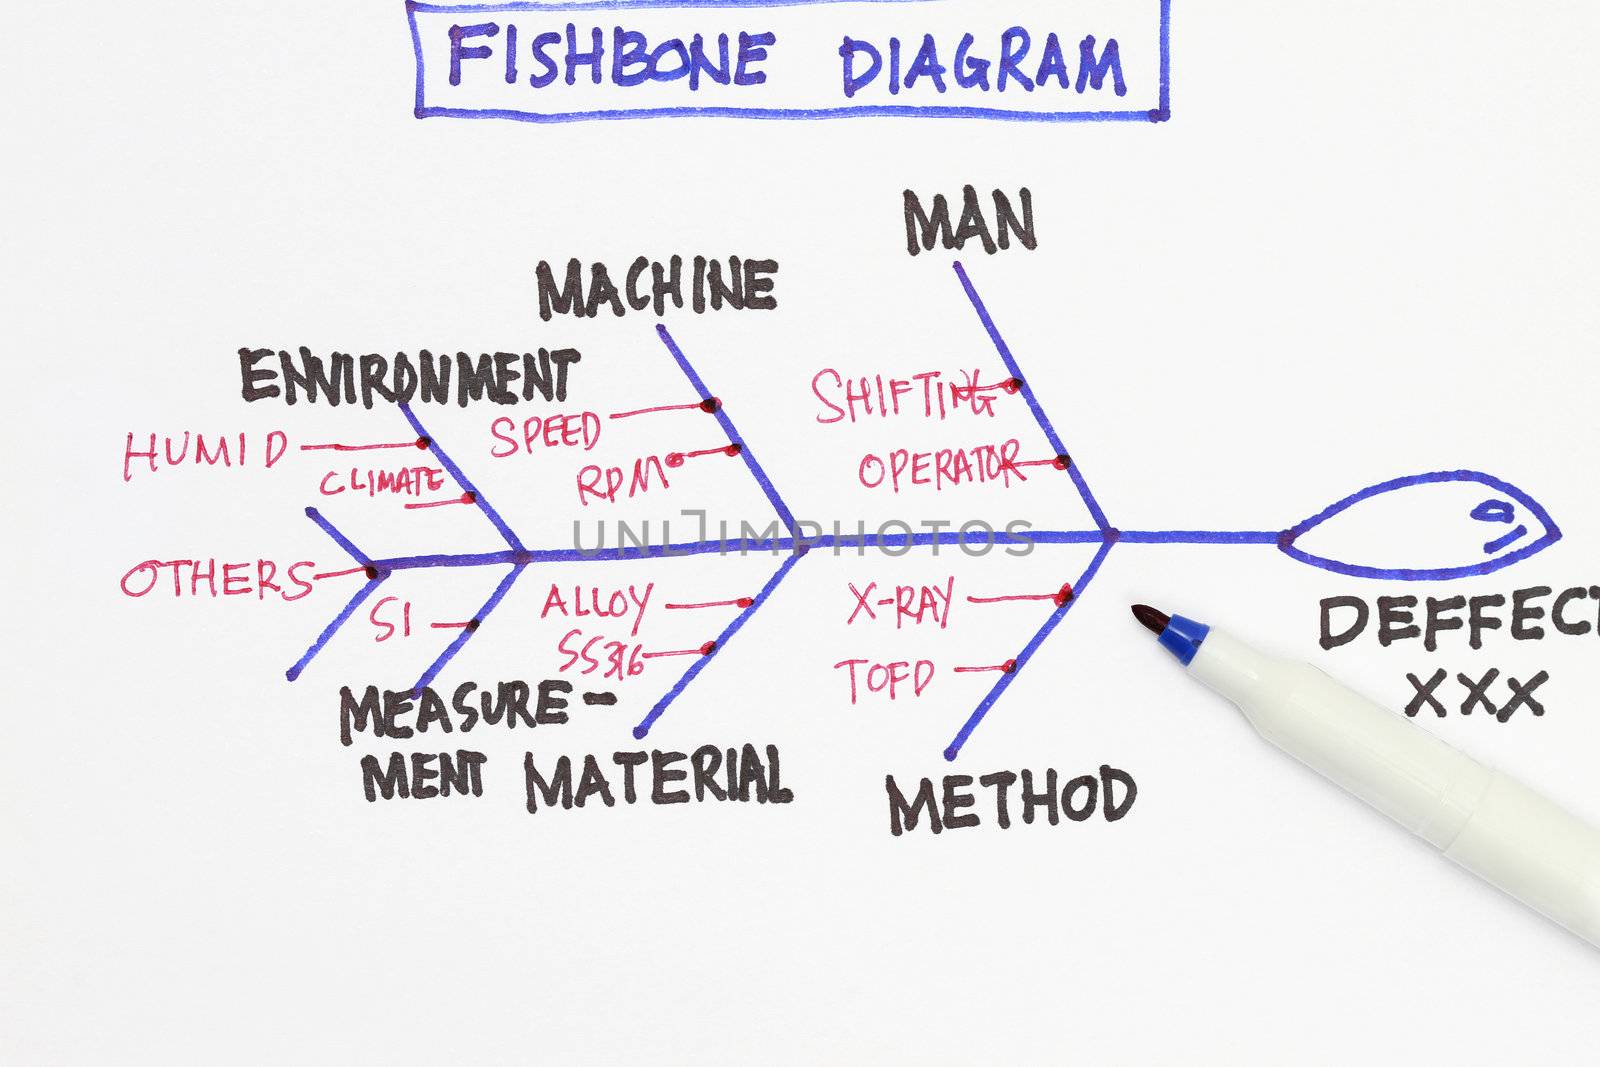 Fishbone diagram - many uses in the manufacturing industry.